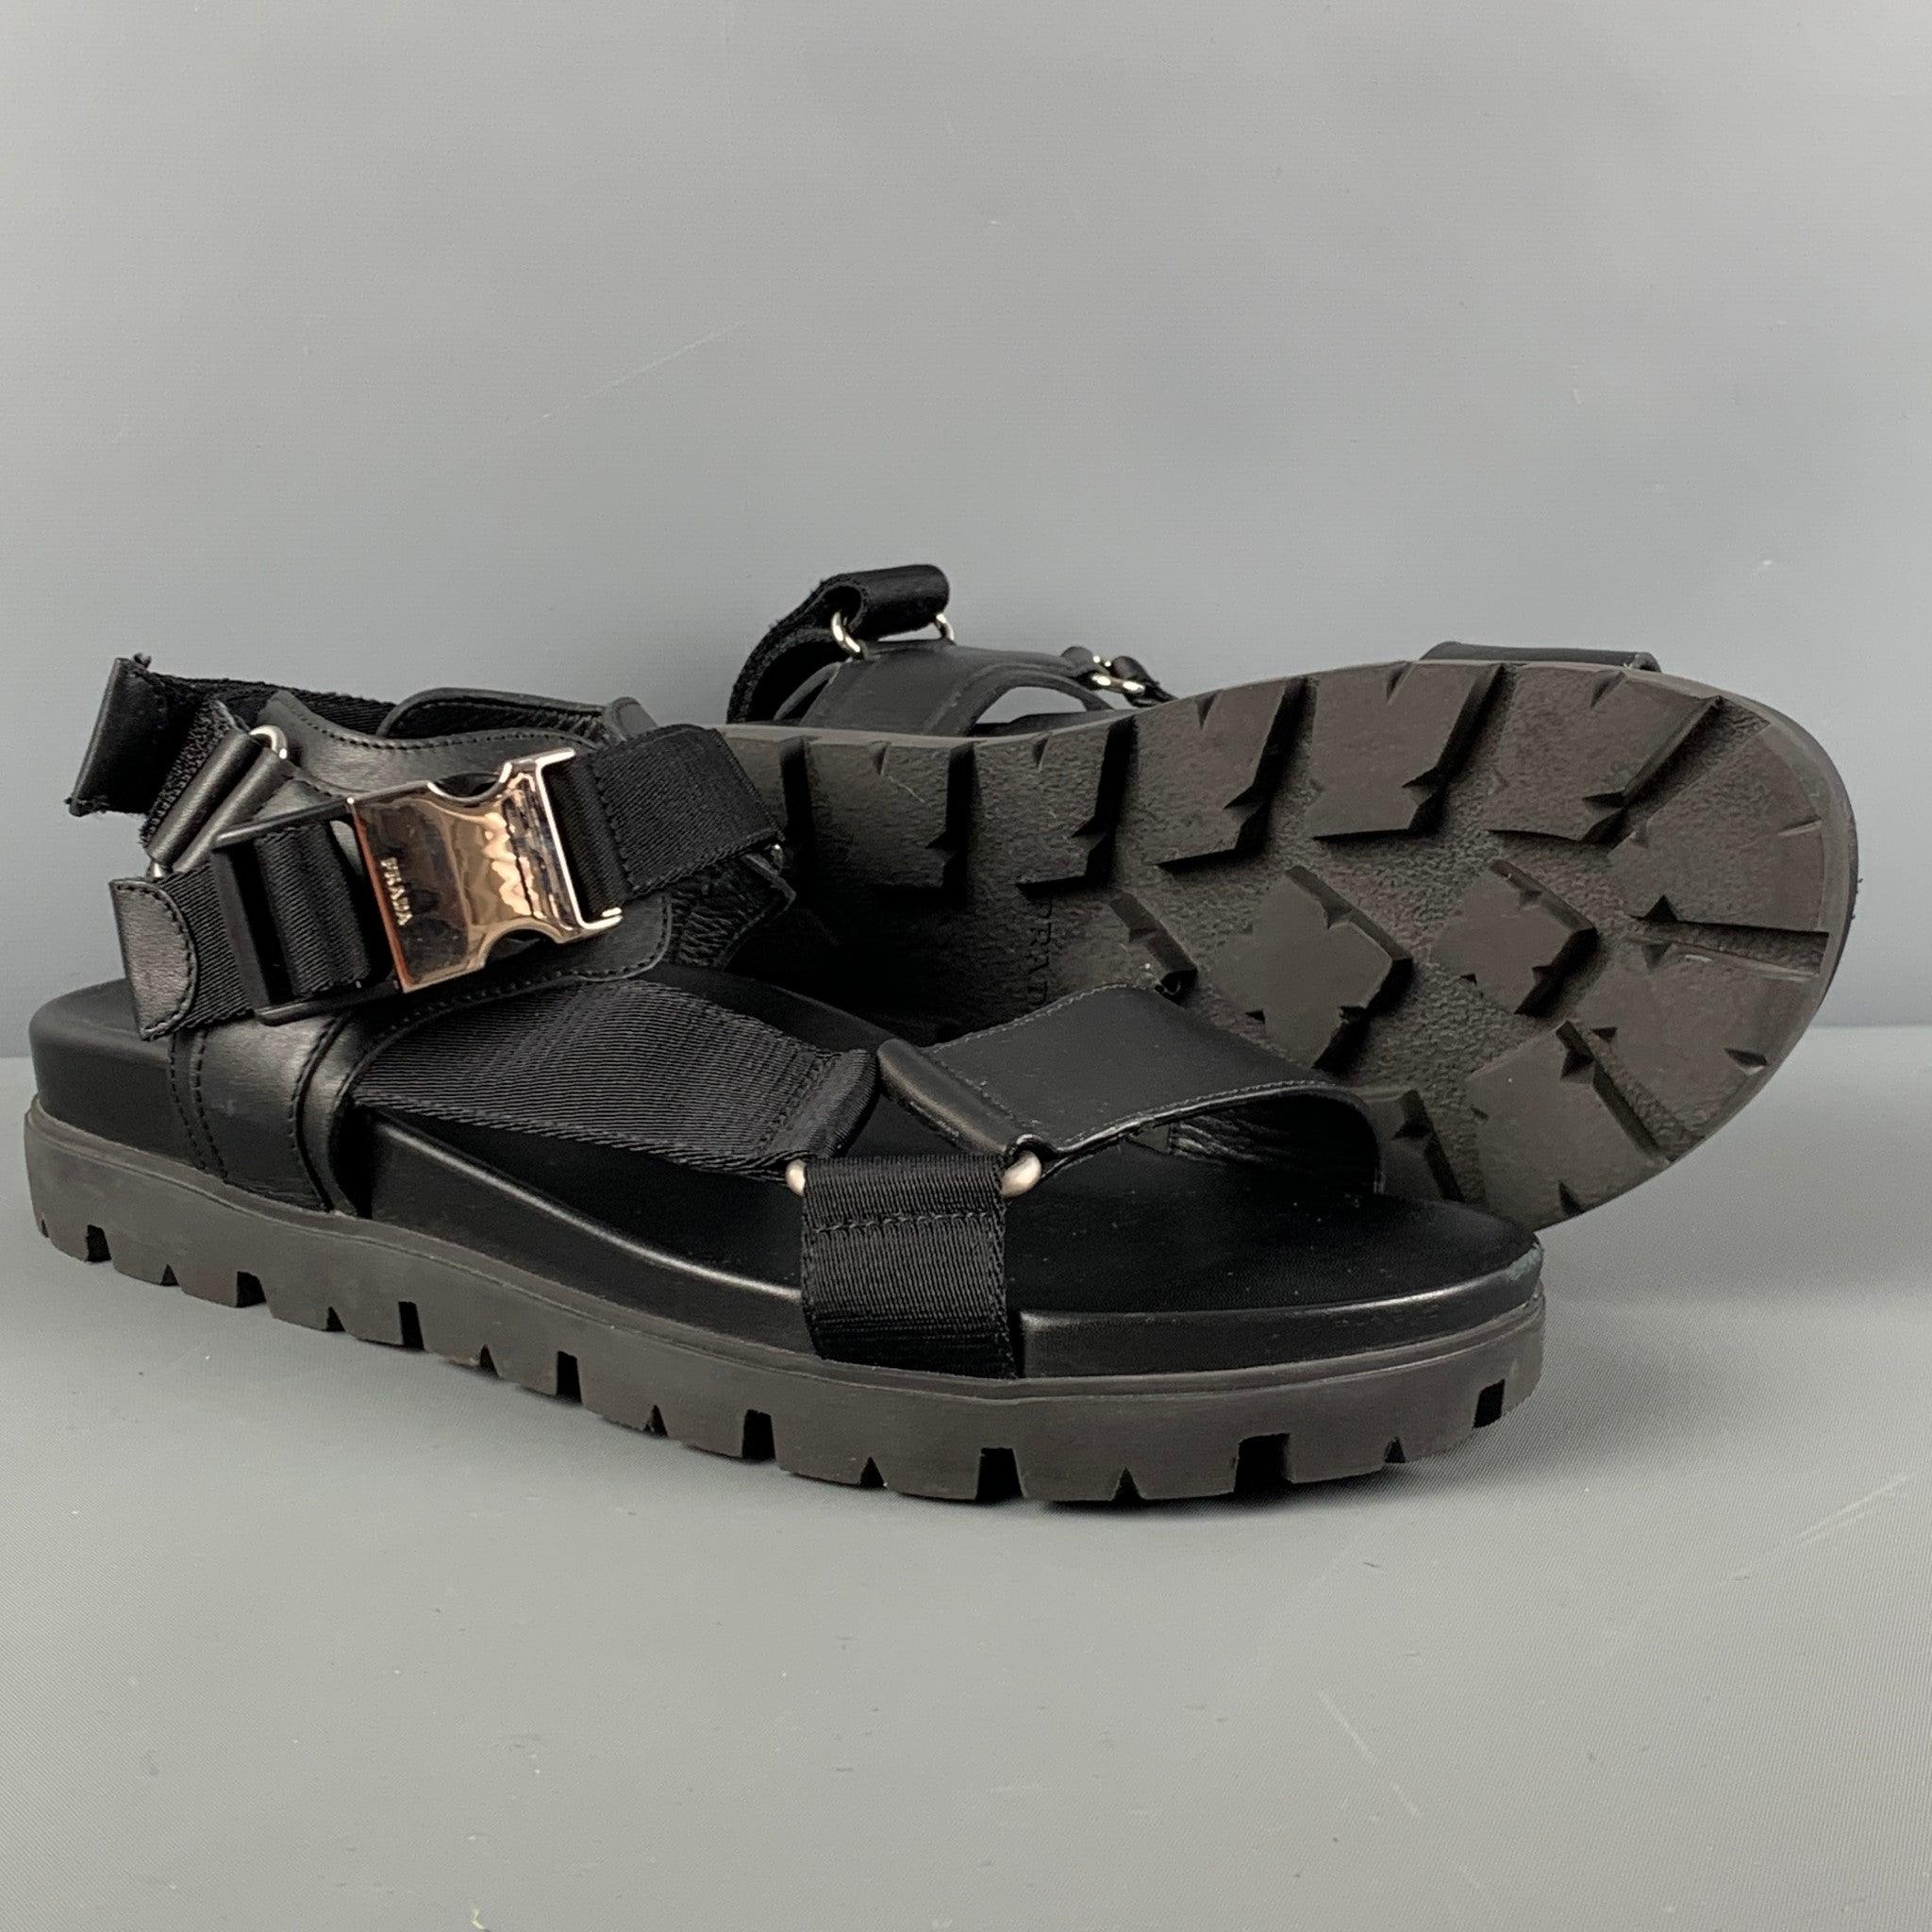 PRADA Size 8 Black Leather Belted Buckle Sandals In Good Condition For Sale In San Francisco, CA